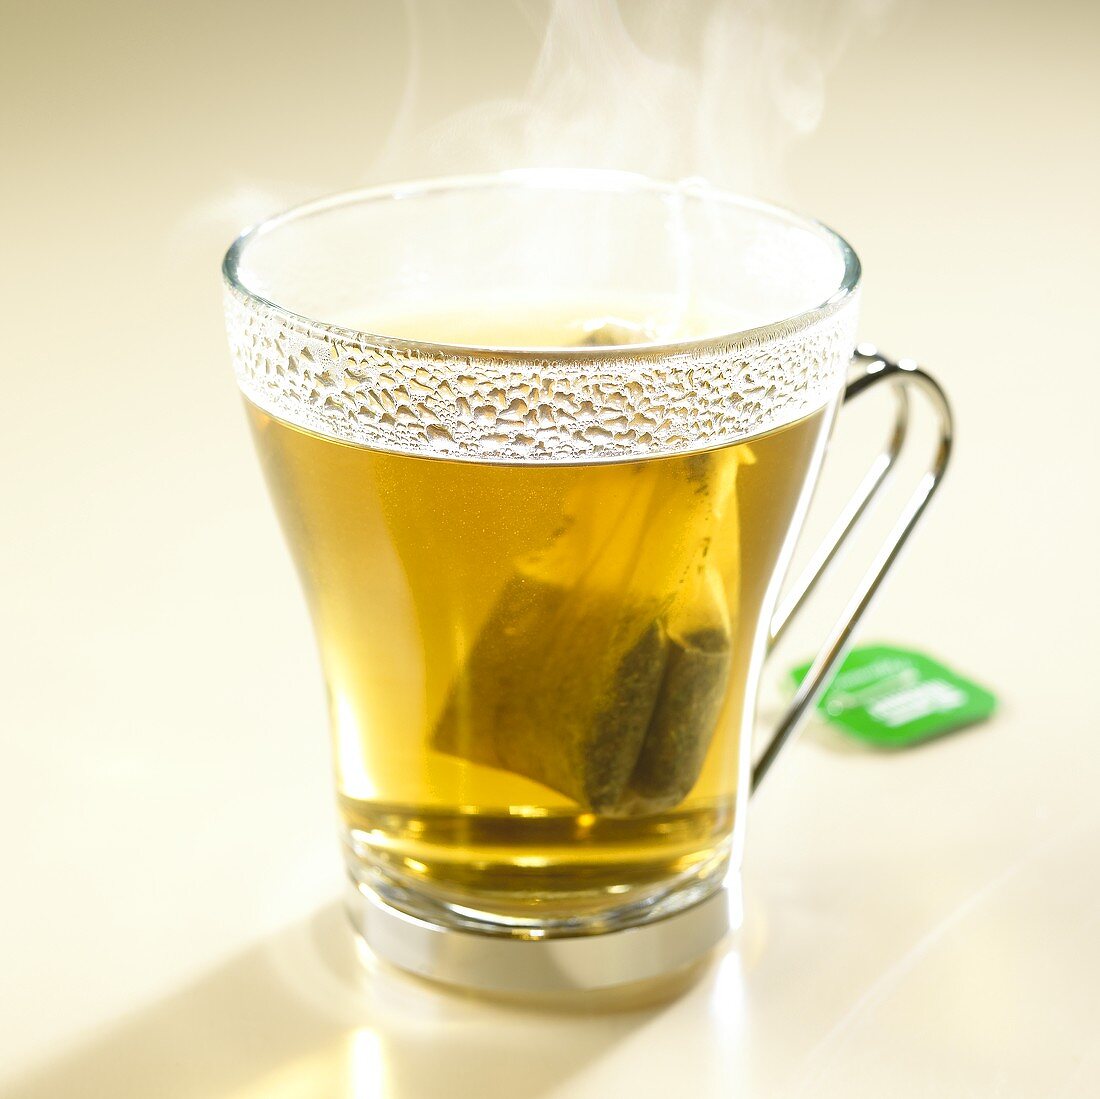 Hot peppermint tea with tea bag in glass